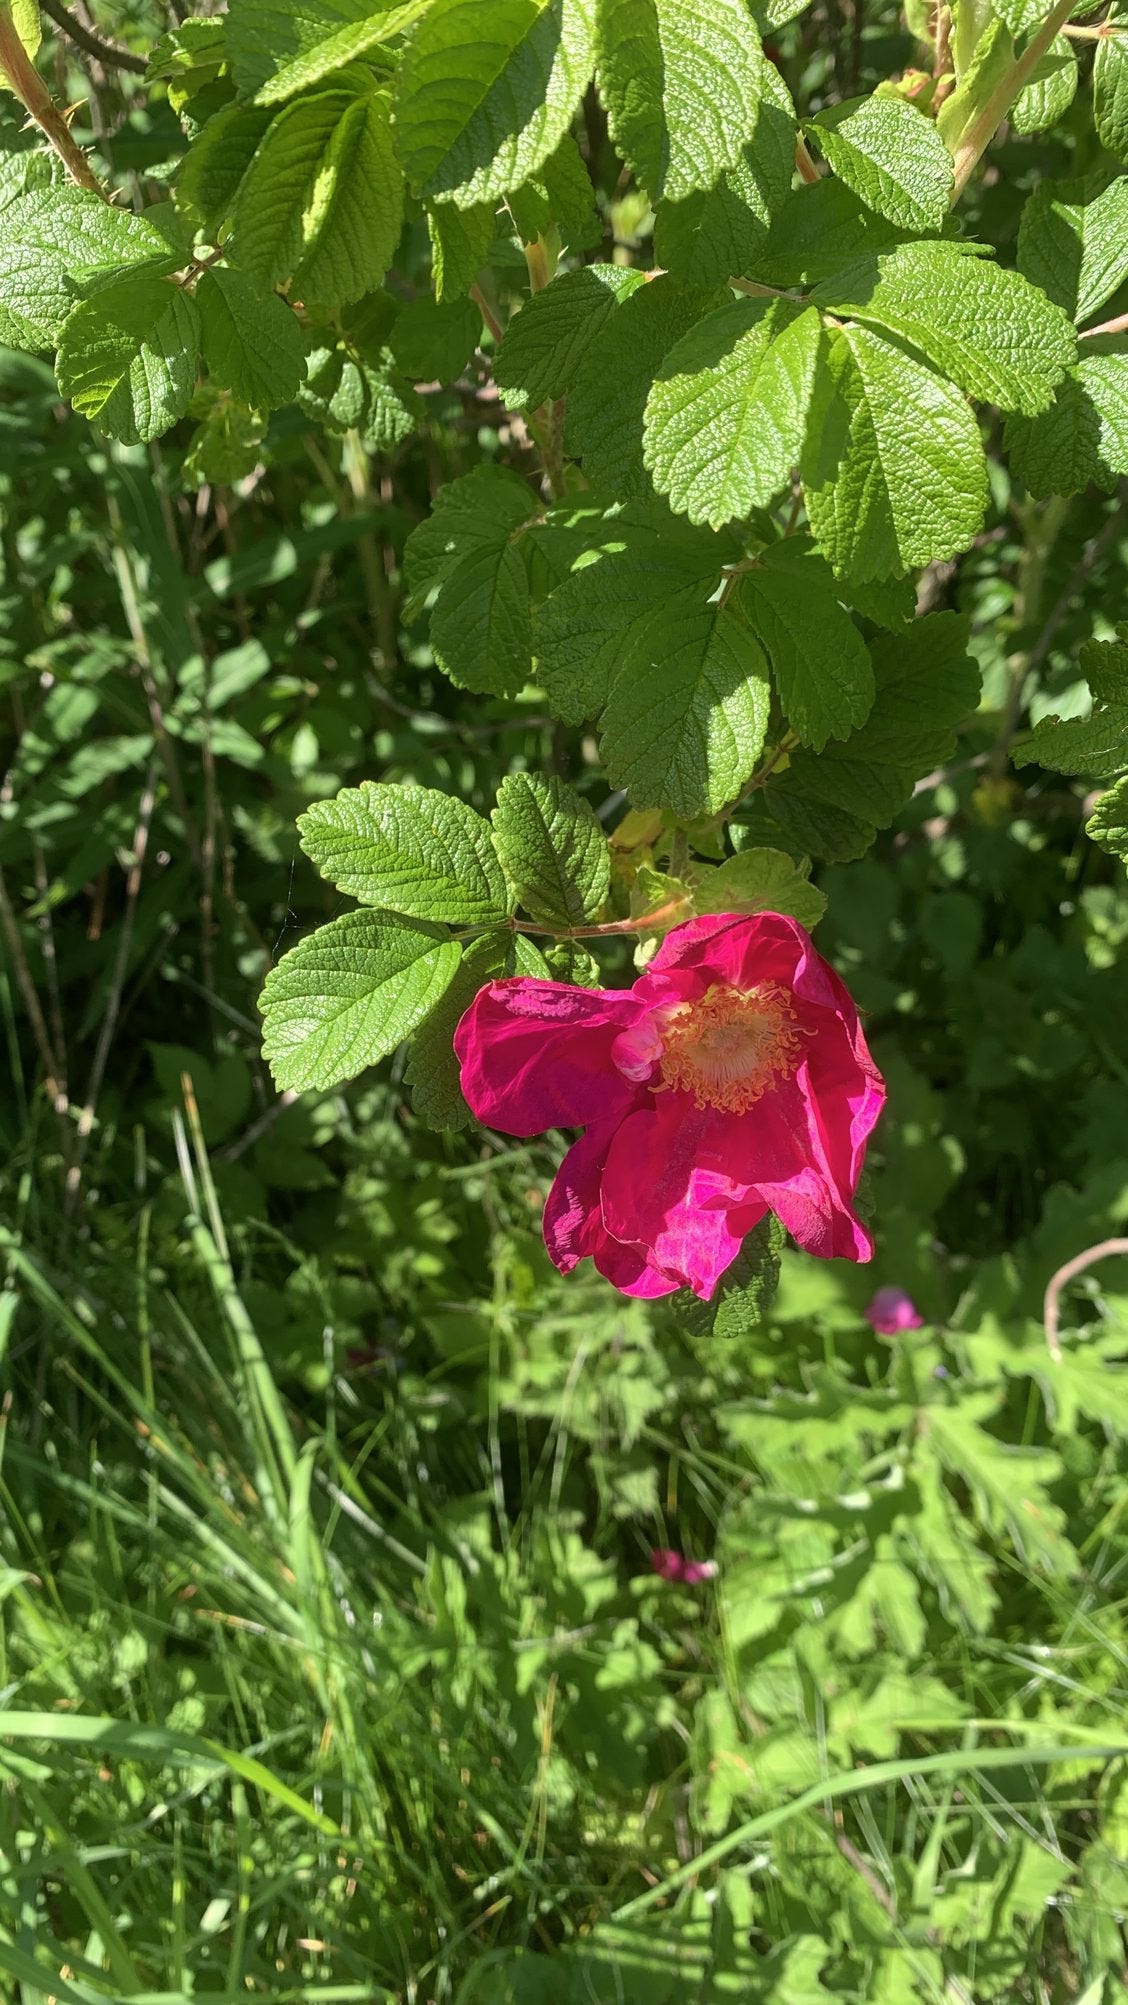 A bright pink wild rose against fresh green foliage.